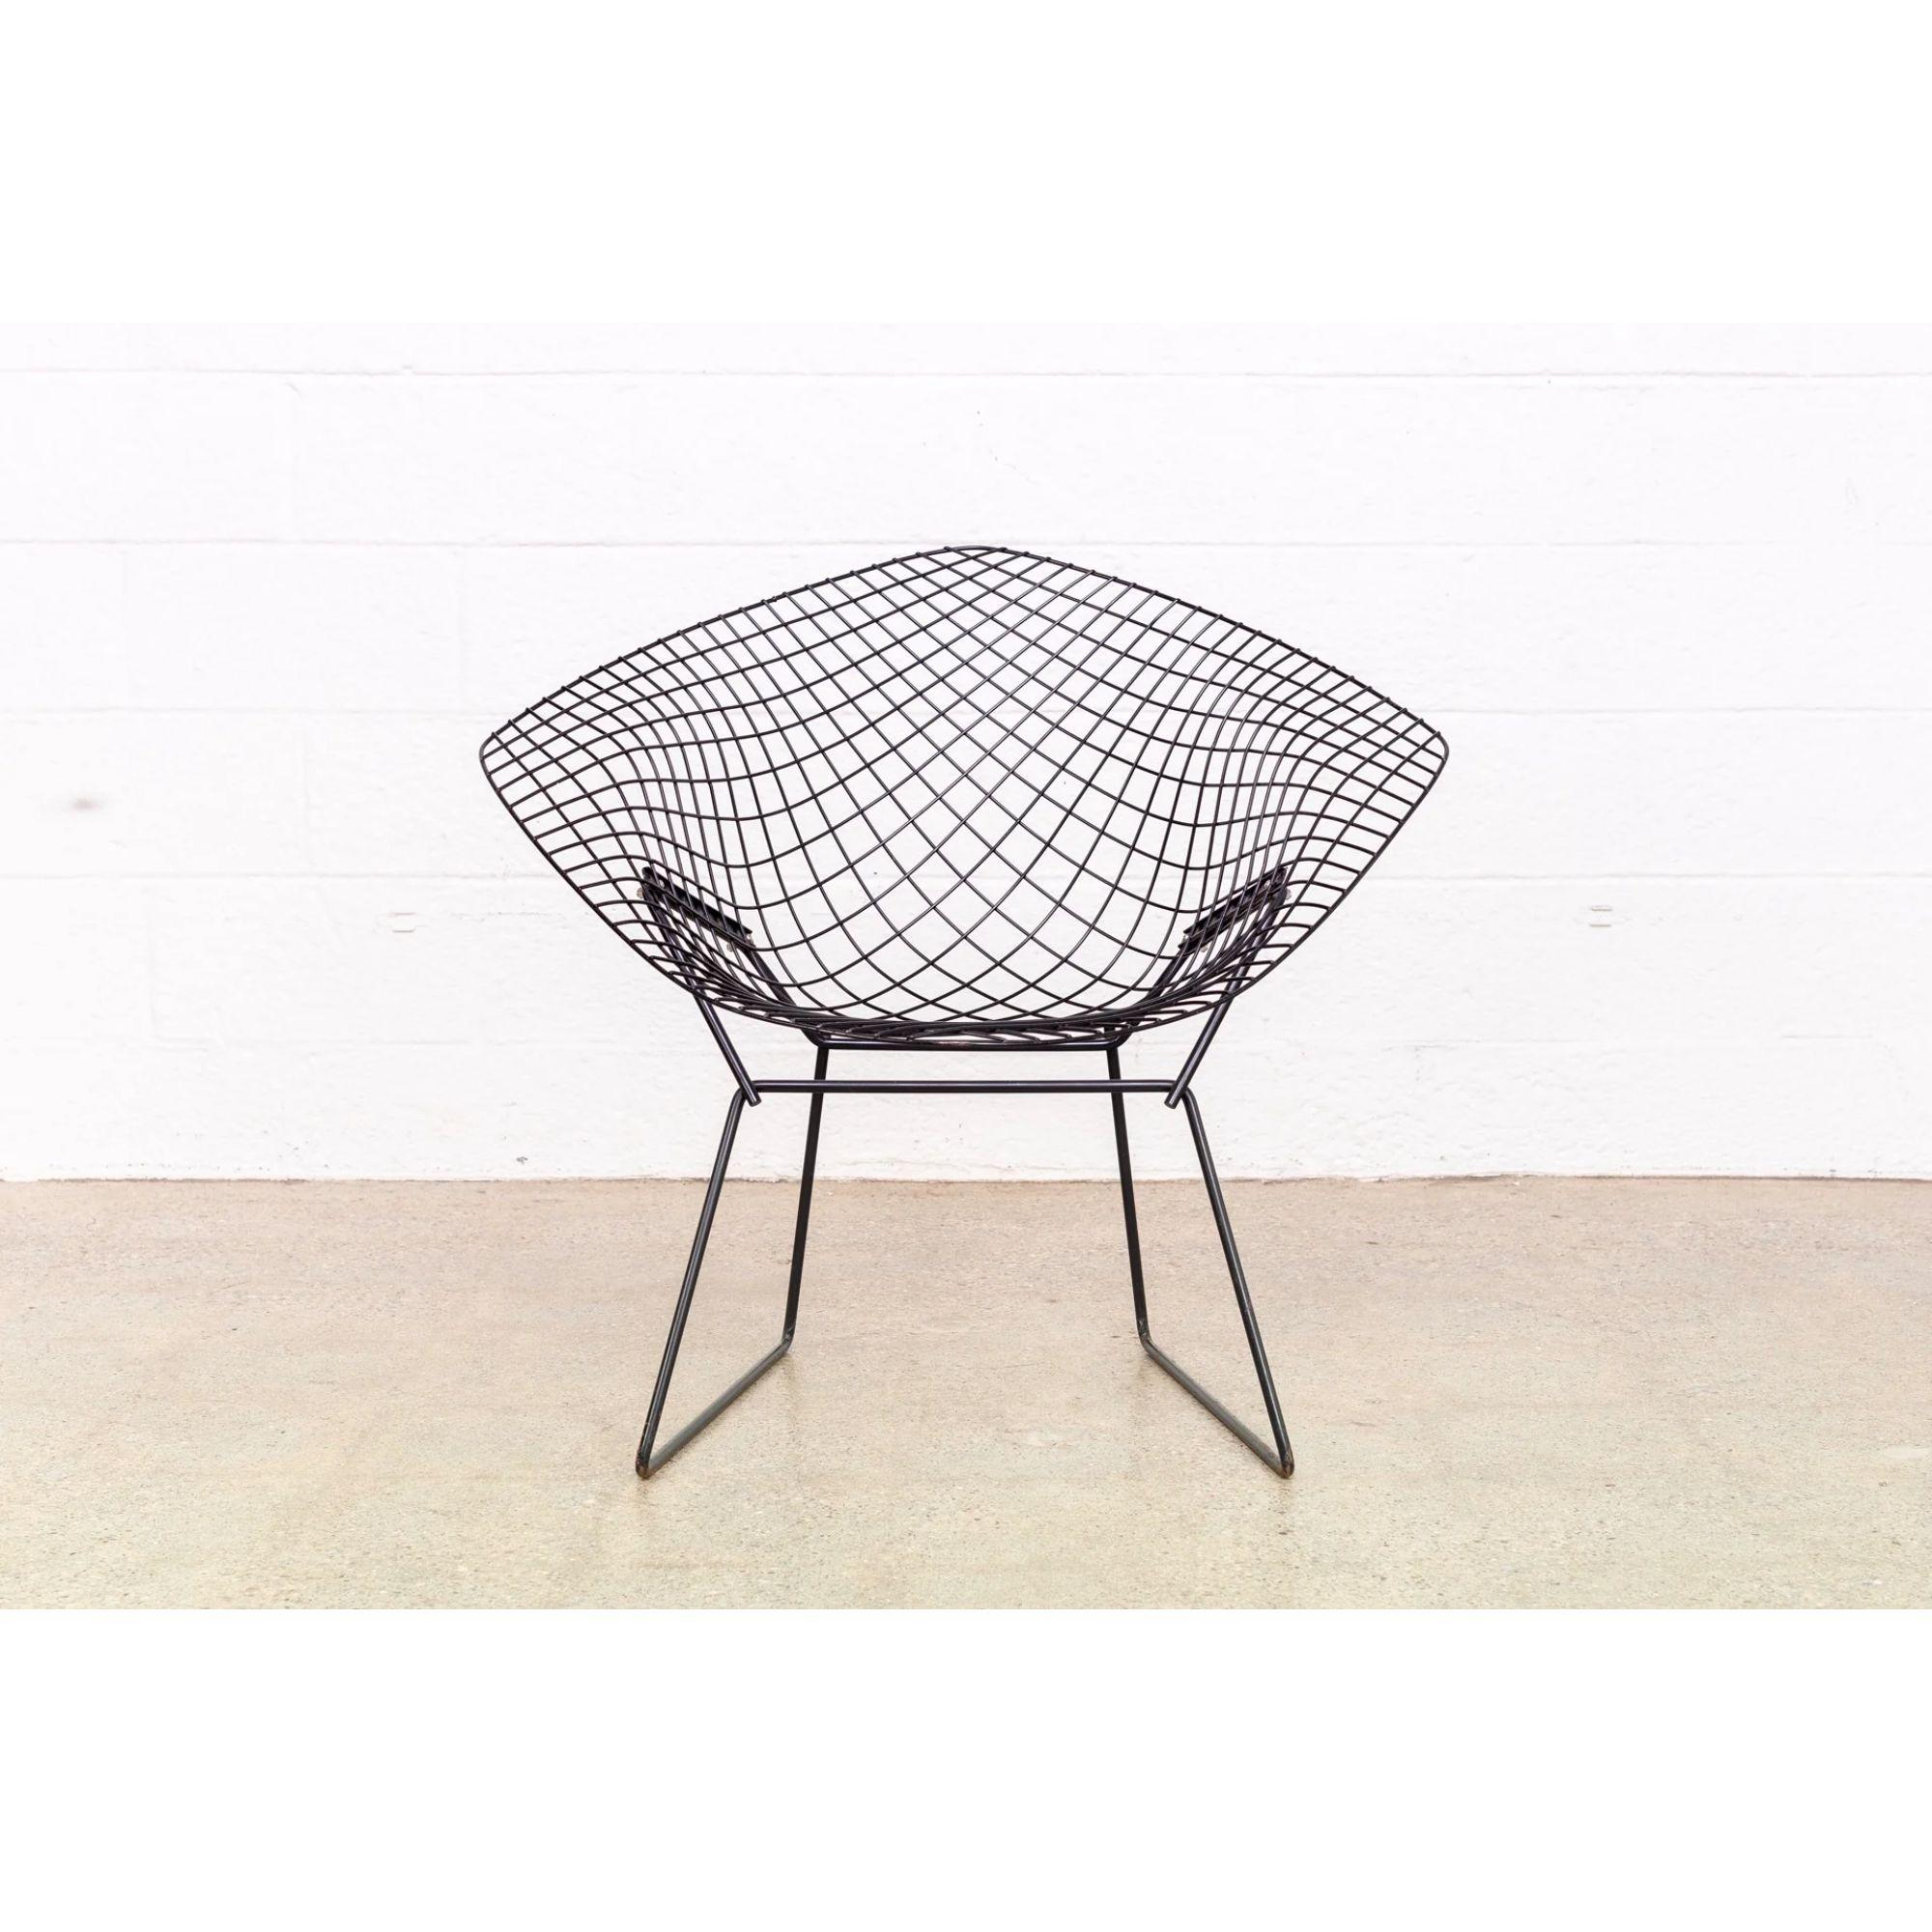 Original Vintage Mid Century Harry Bertoia for Knoll Black Diamond Wire Lounge Chair

This vintage diamond wire lounge chair was designed by Harry Bertoia for Knoll in 1952. The chair features welded steel rod construction with a black finish. The